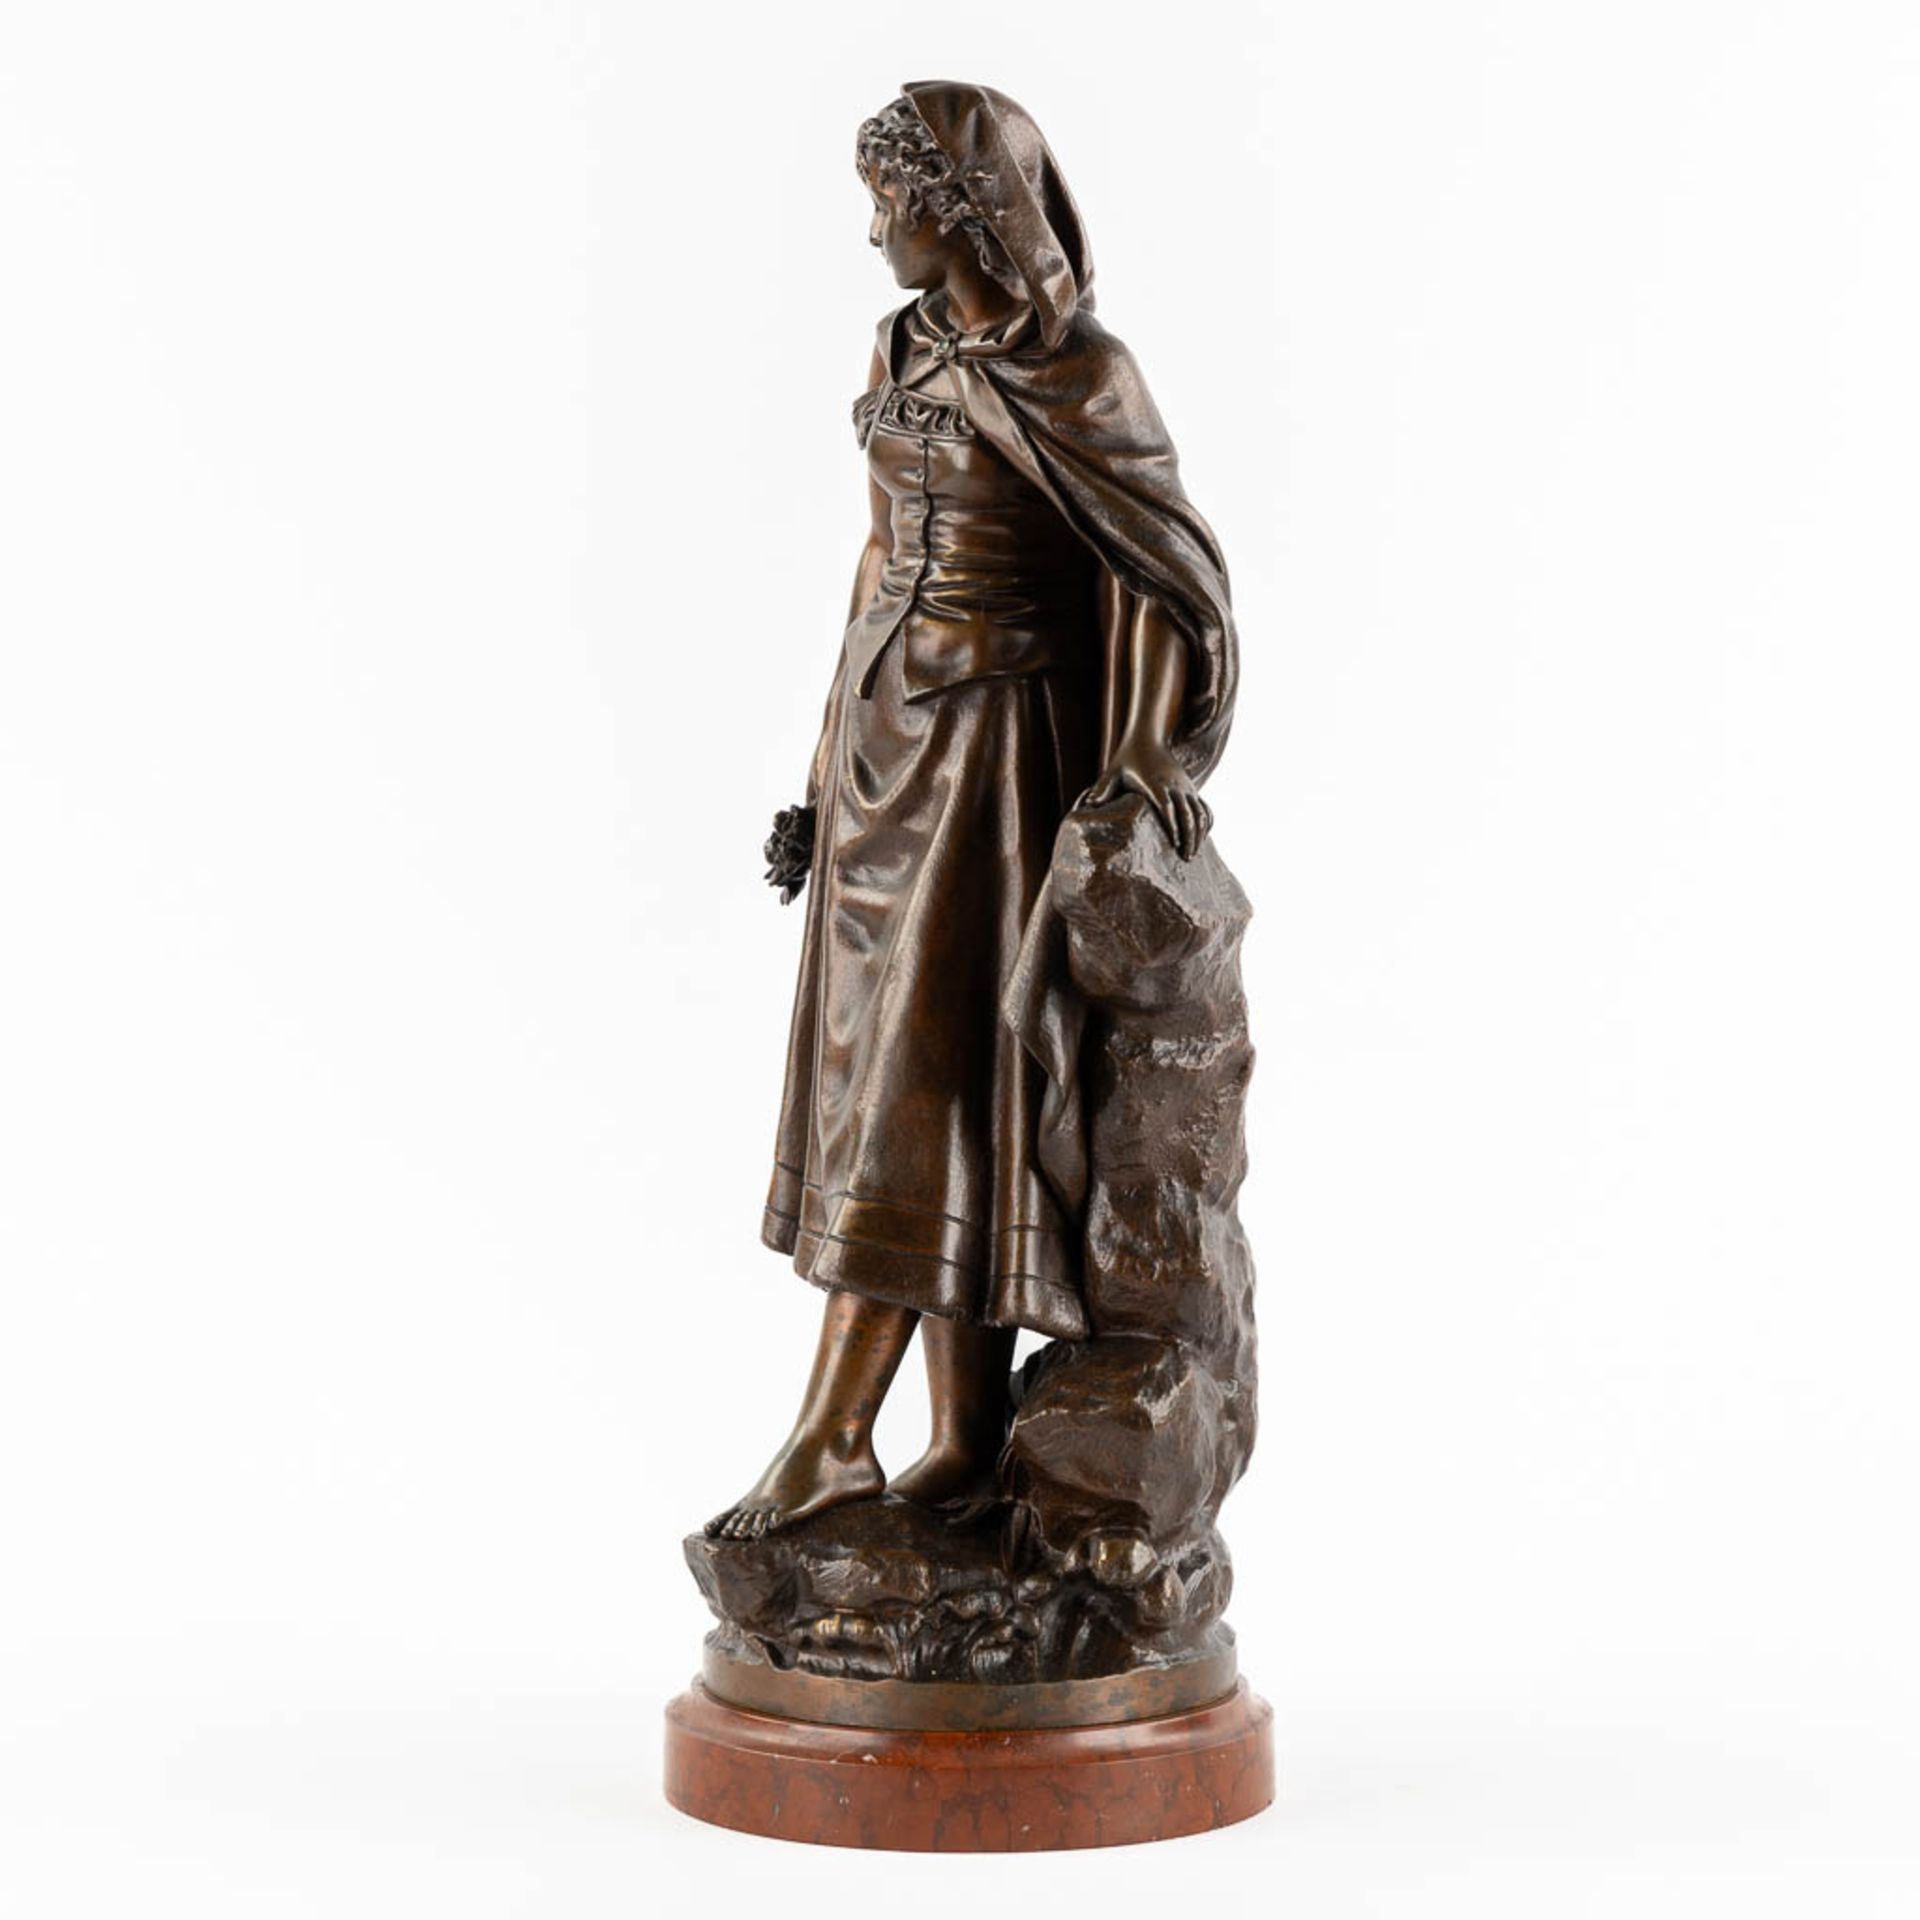 Eutrope BOURET (1833-1906) 'Lady with flowers' patinated bronze on a marble base. (L:19 x W:17 x H:4 - Image 7 of 11